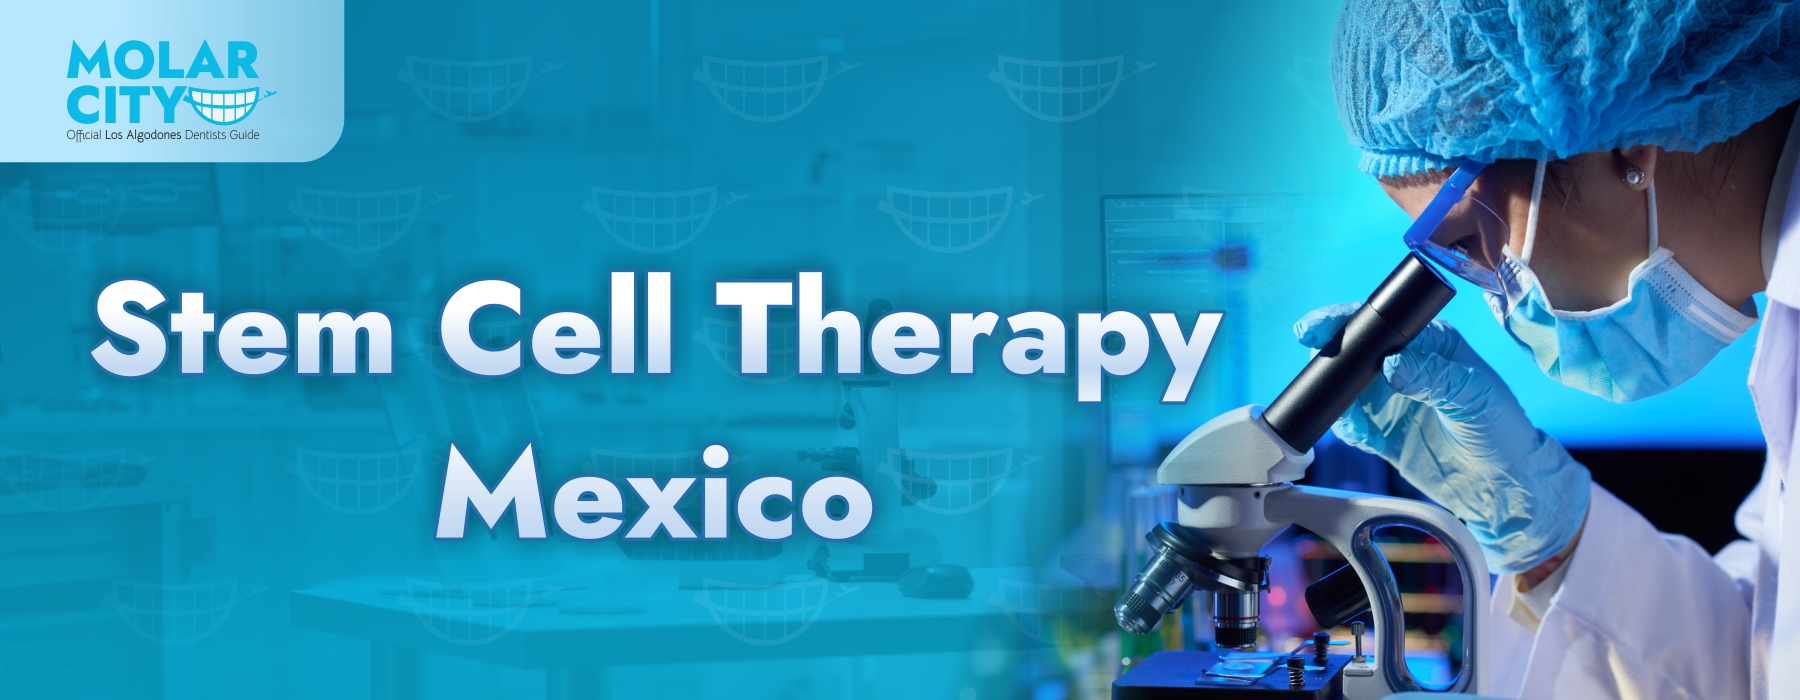 Stem Cell Therapy in Mexico